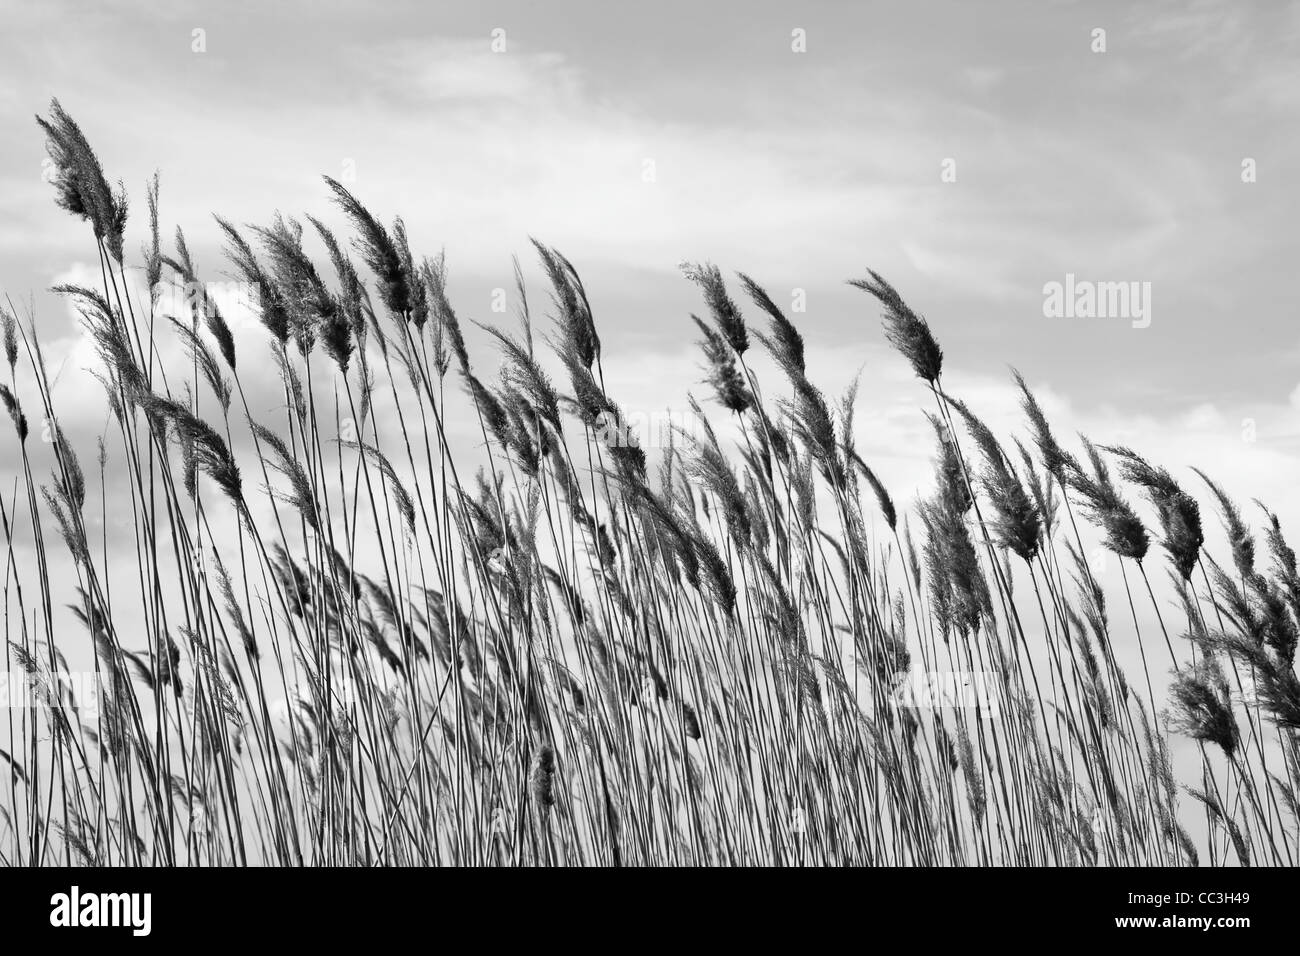 Tall grass against sky. Black and white. Stock Photo